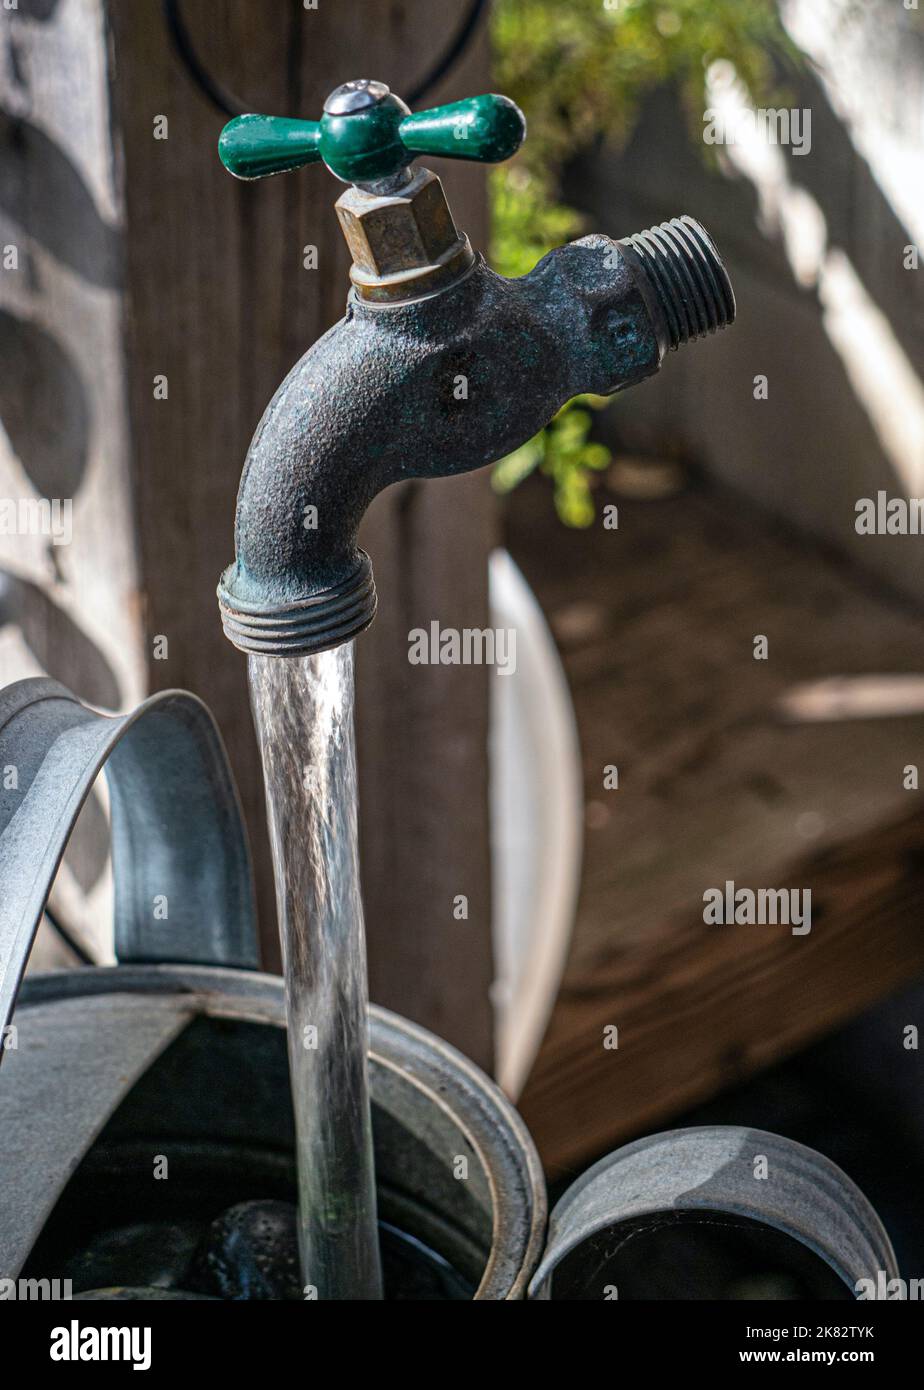 Magic Garden Tap feature water apparently running novelty trick, water running into stone filled water bucket from water tap appearing to float in air Stock Photo